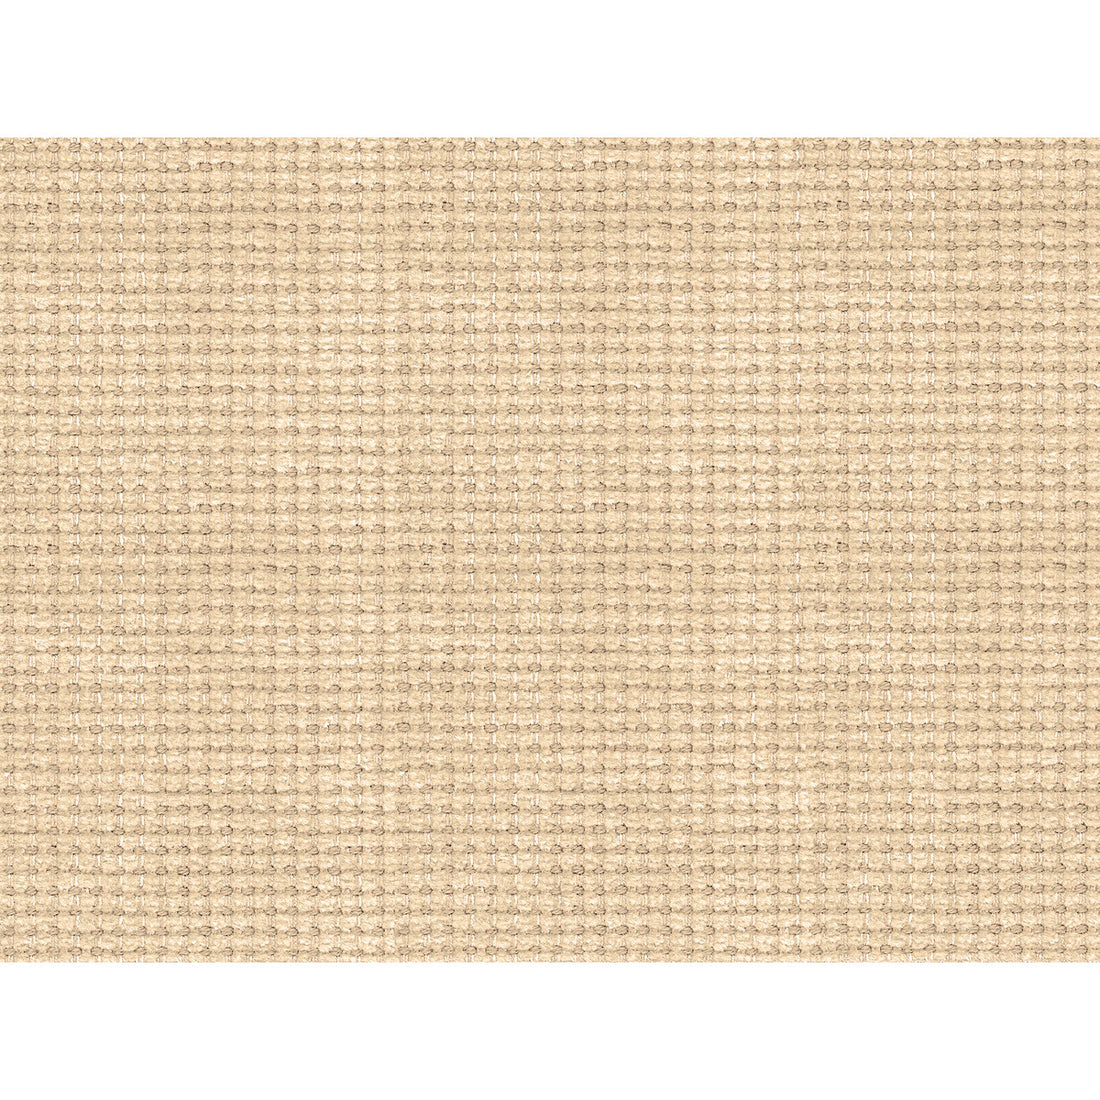 Tostig fabric in beige color - pattern 2016127.416.0 - by Lee Jofa in the Furness Weaves collection